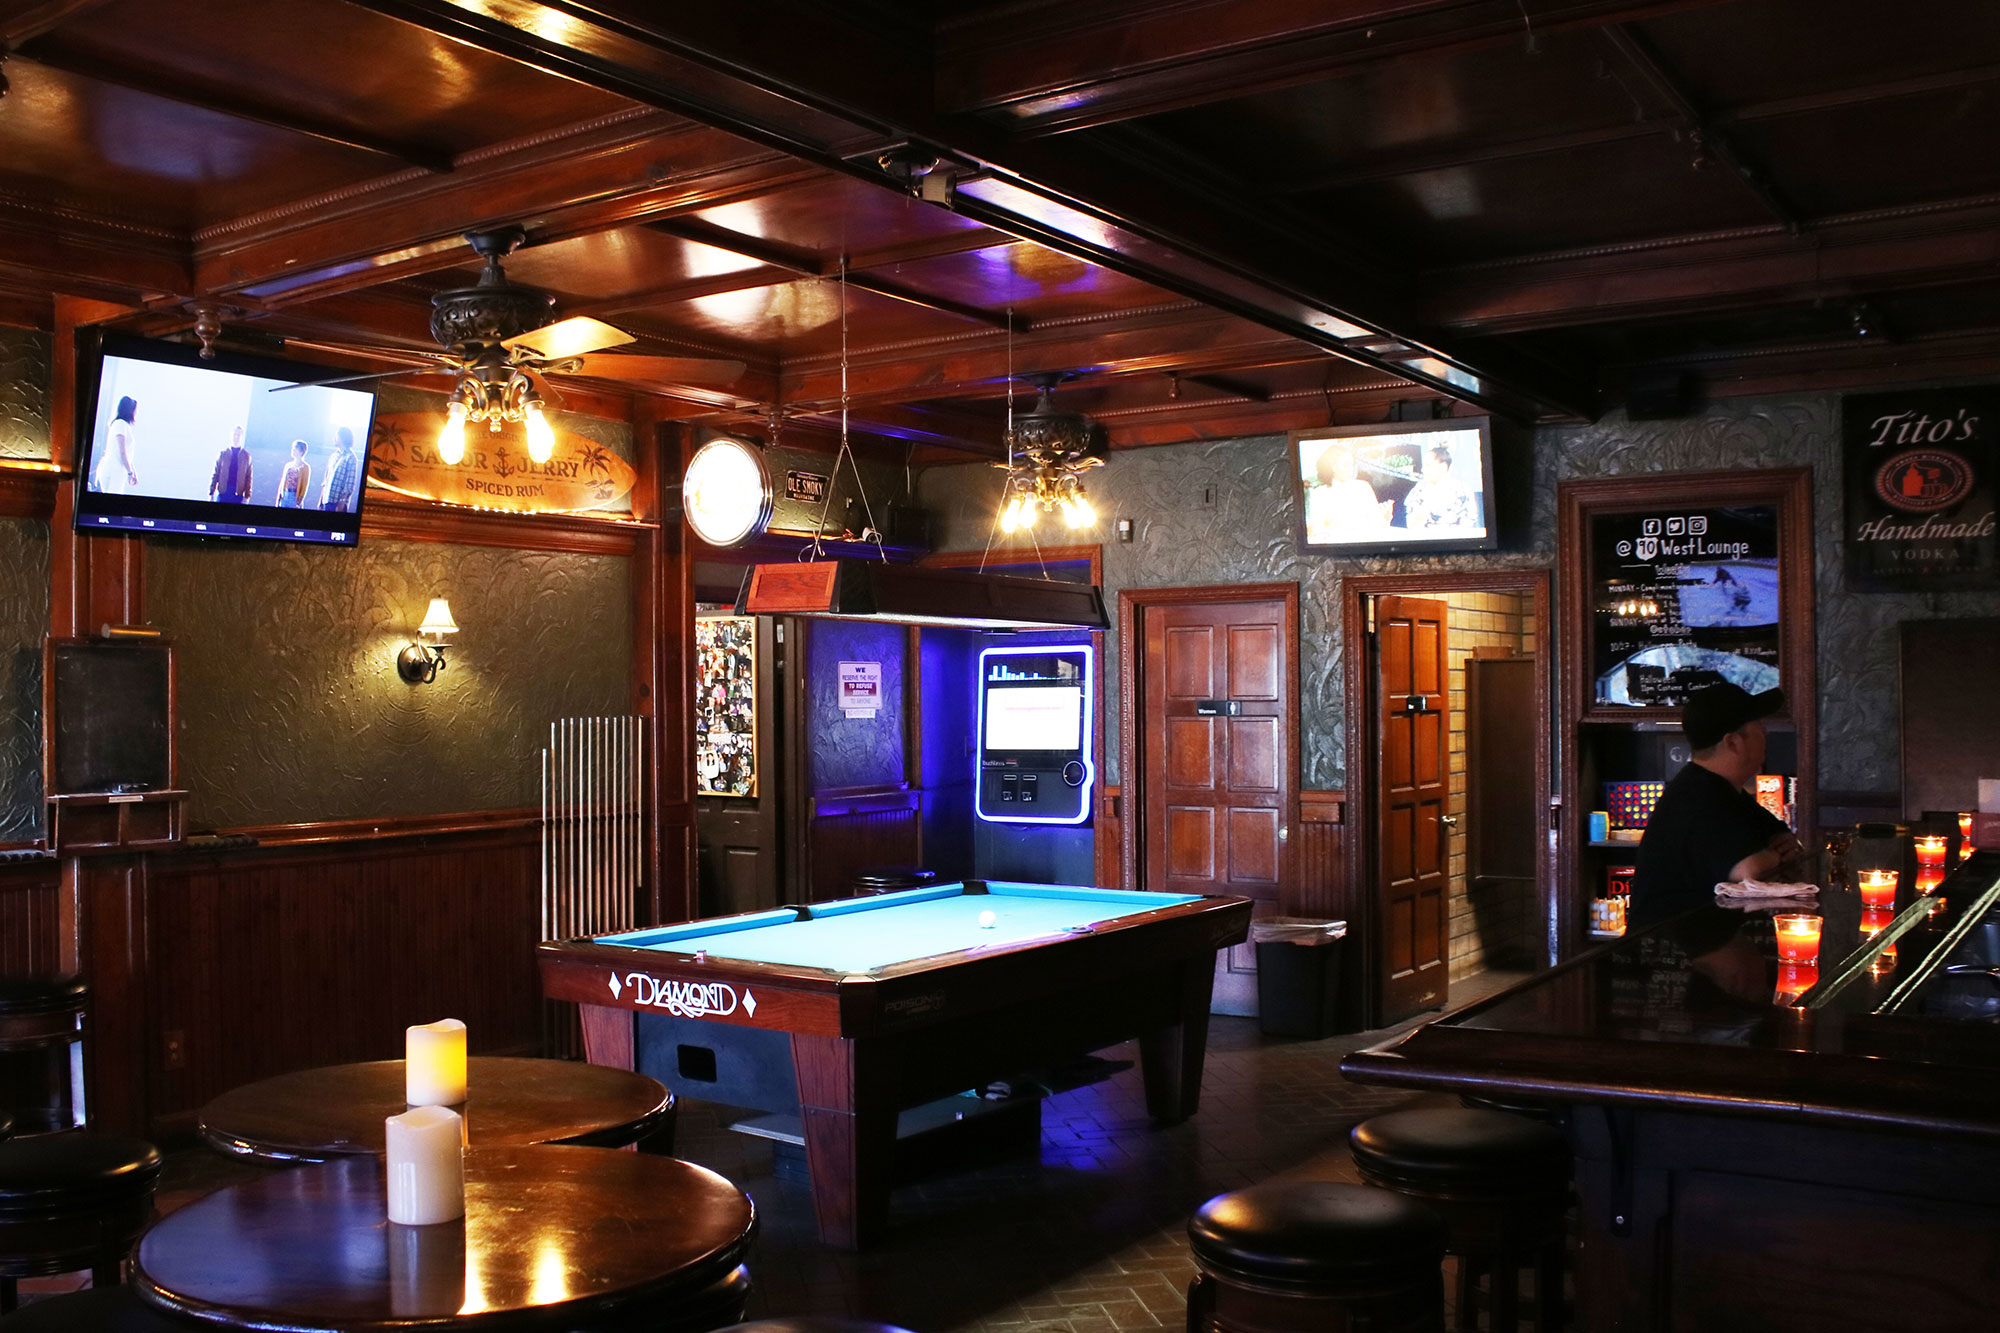 Interior, pool table and atmosphere.